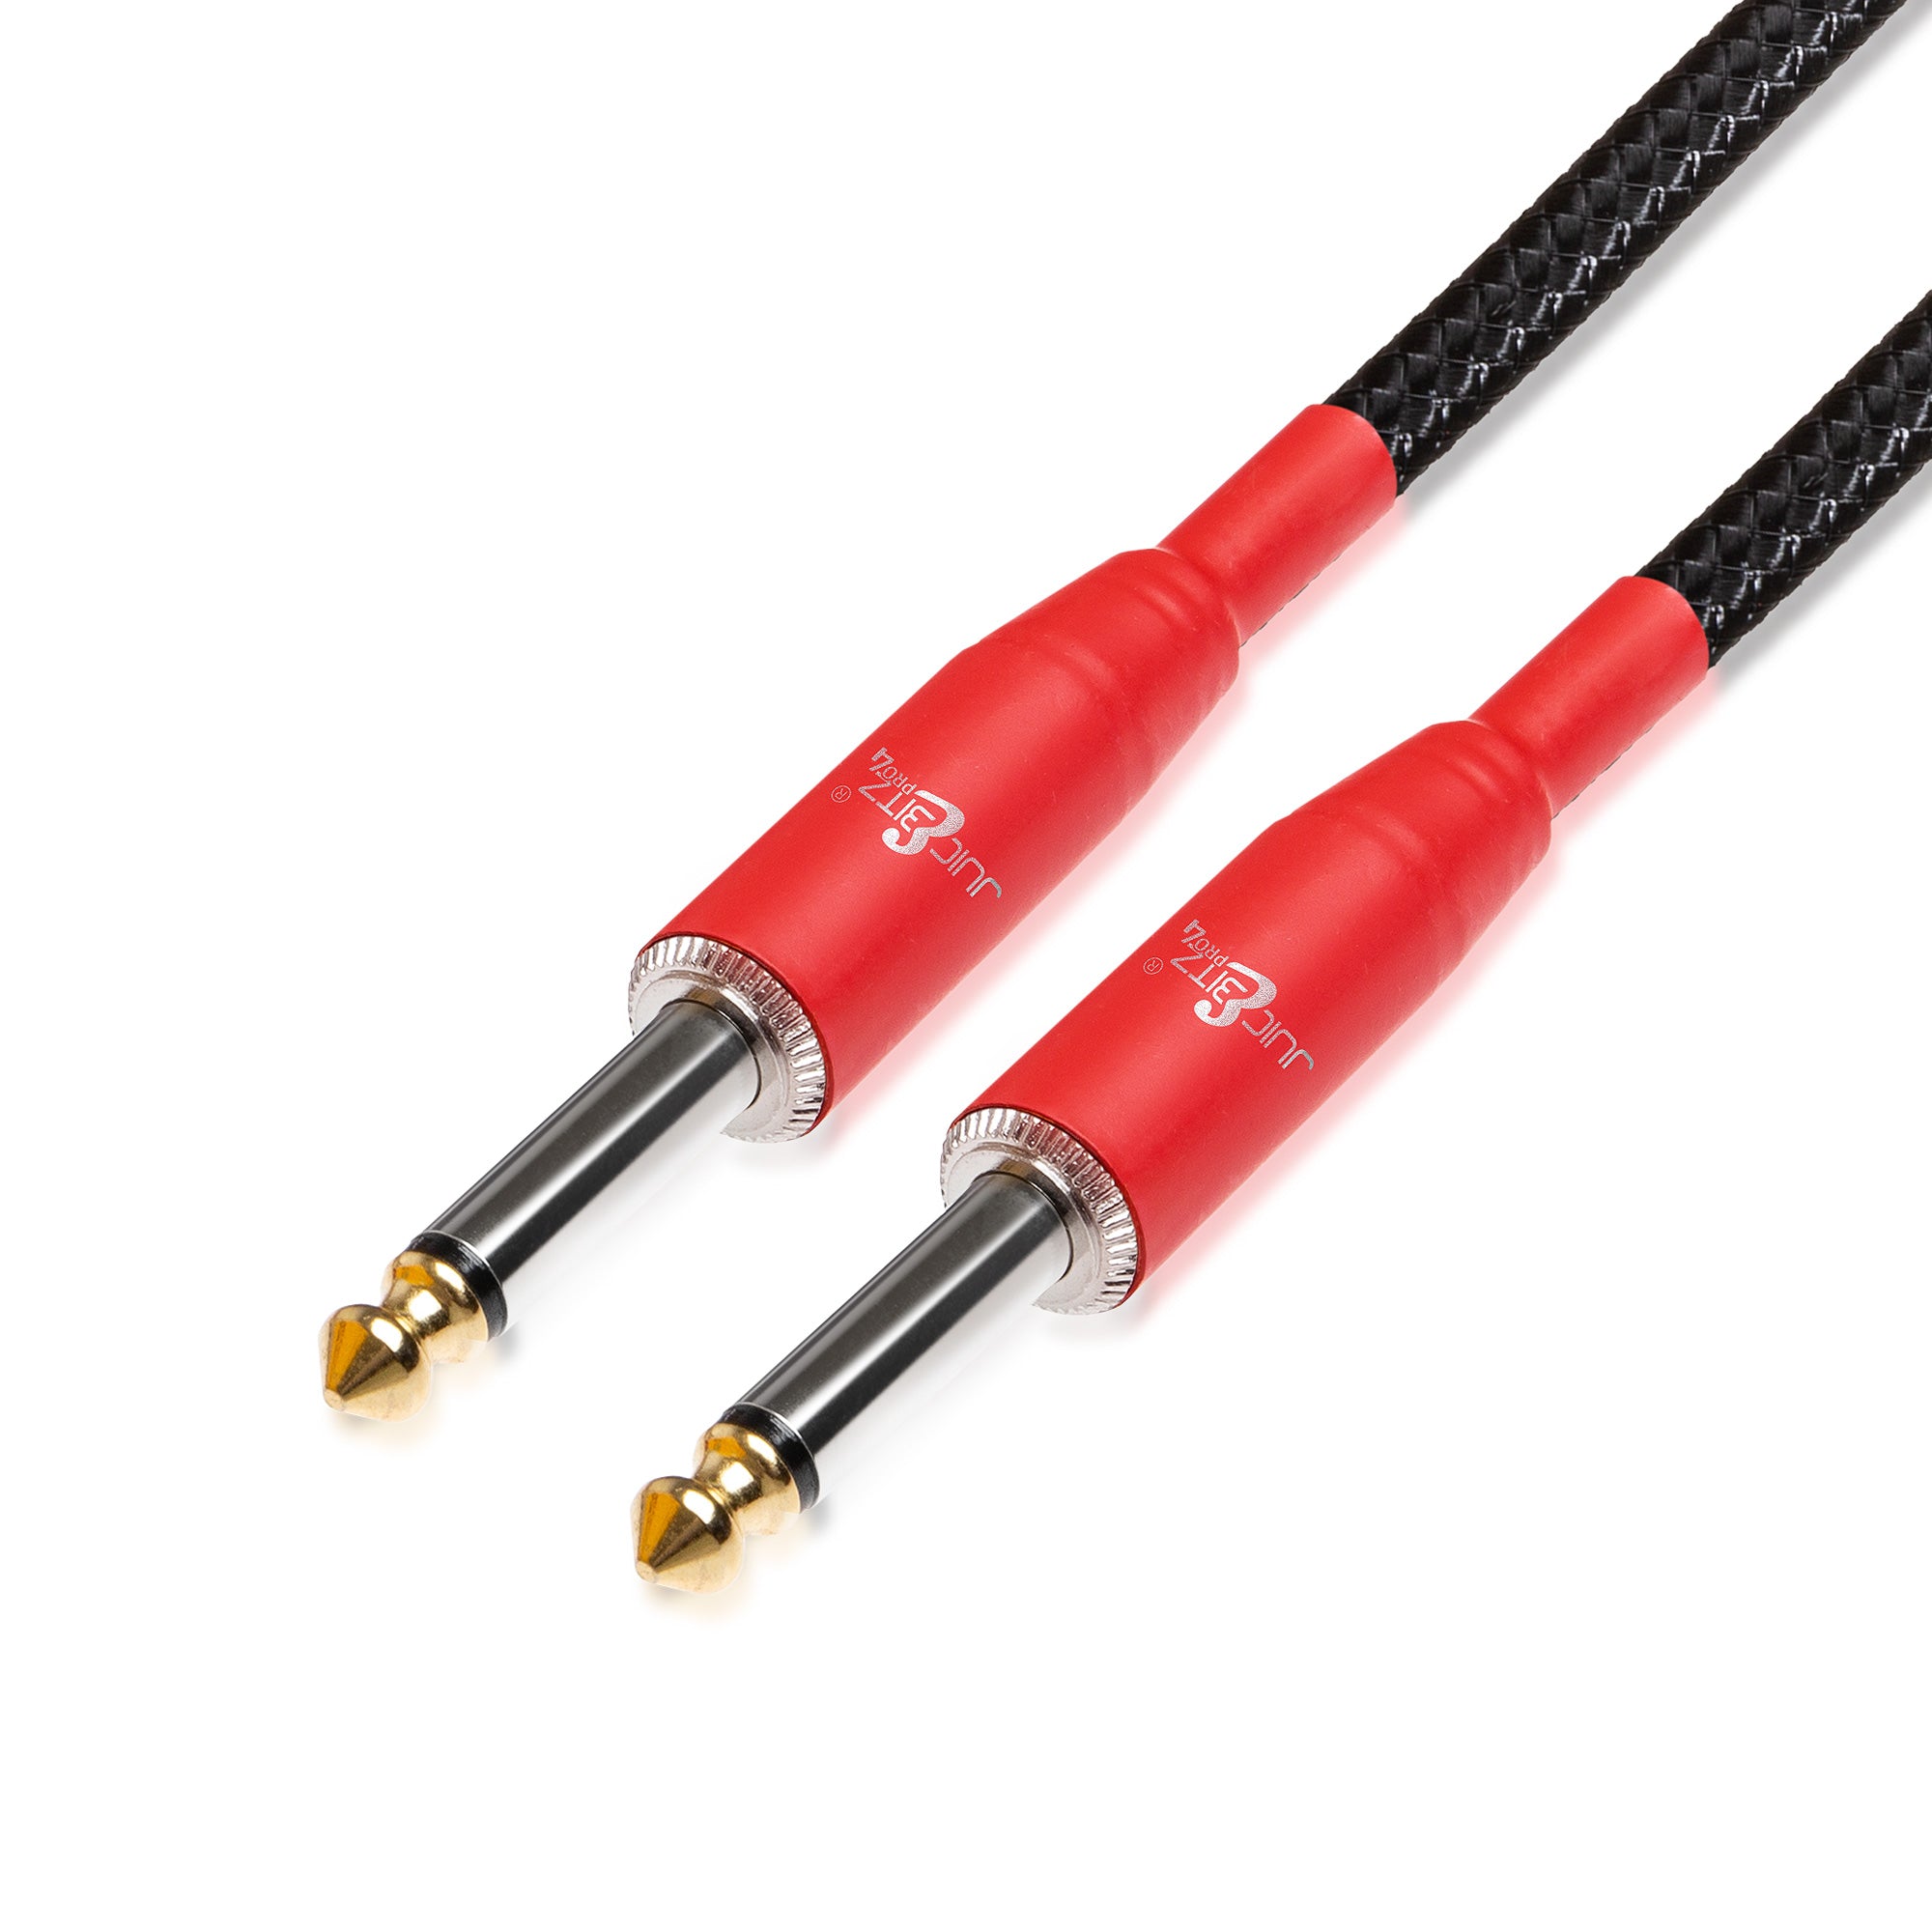 PRO Series Braided Guitar Cable 1/4" Straight Jack to Jack 6.35mm Lead - Black